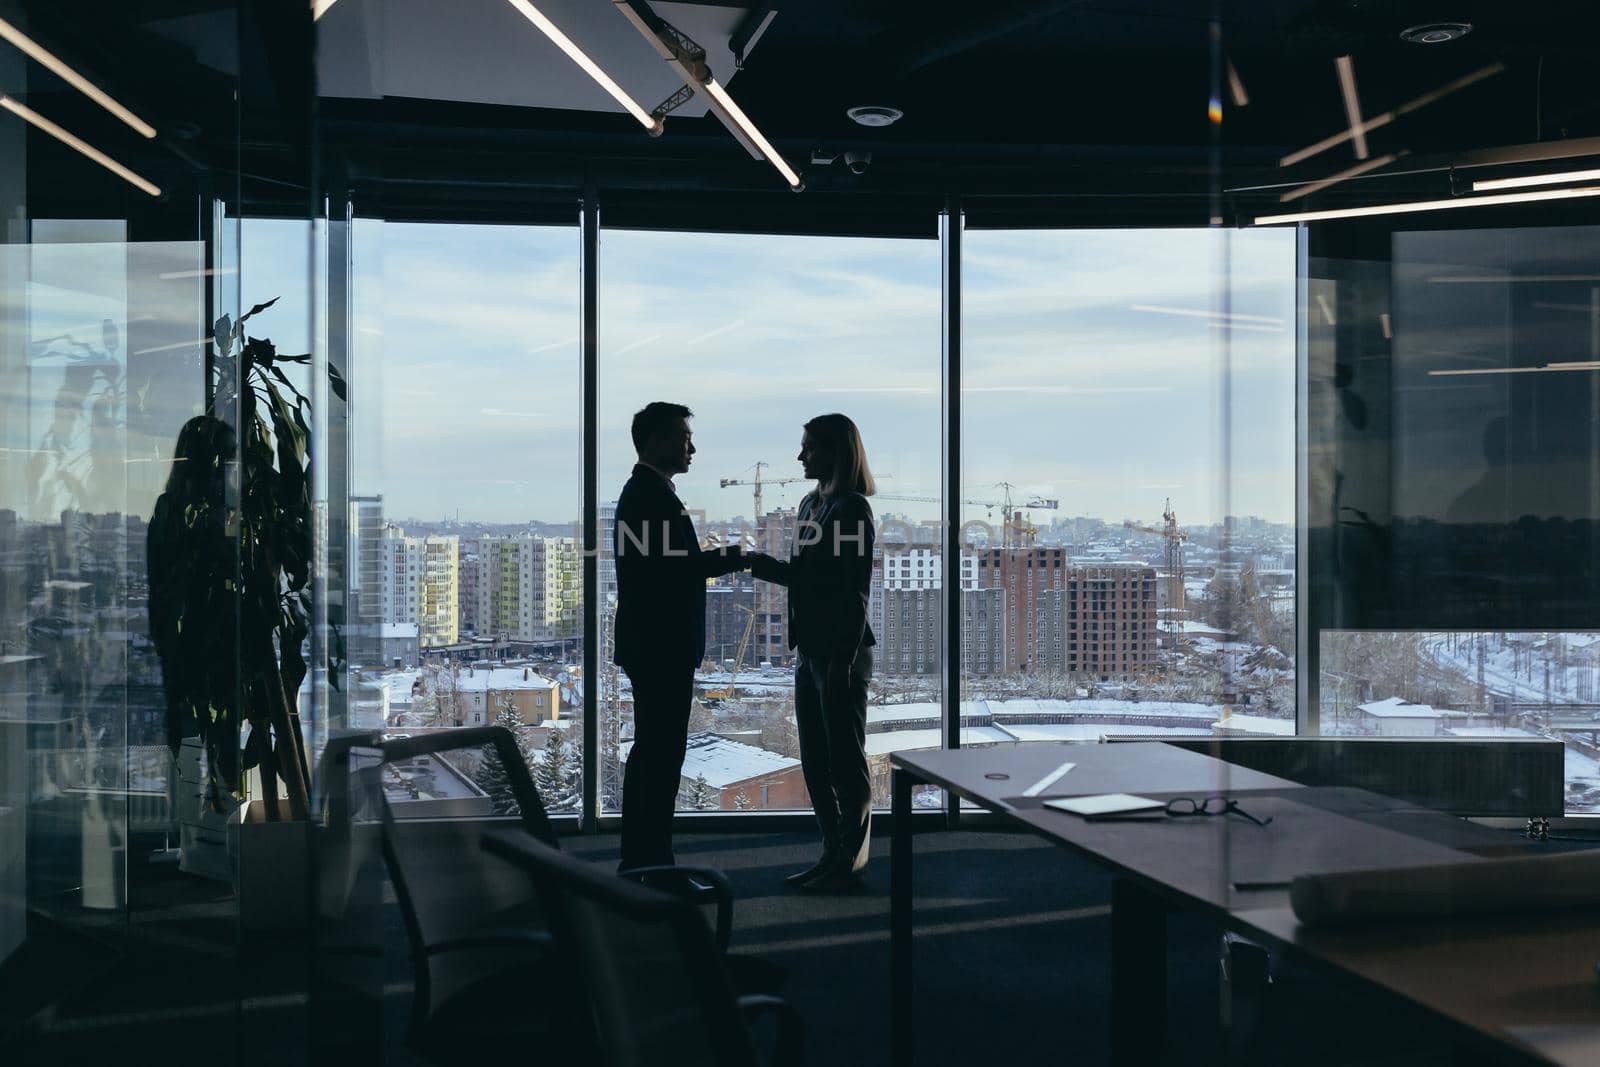 Silhouettes of two employees team of businessmen, Asian man and woman are consulting and communicating, working in a modern office by the window